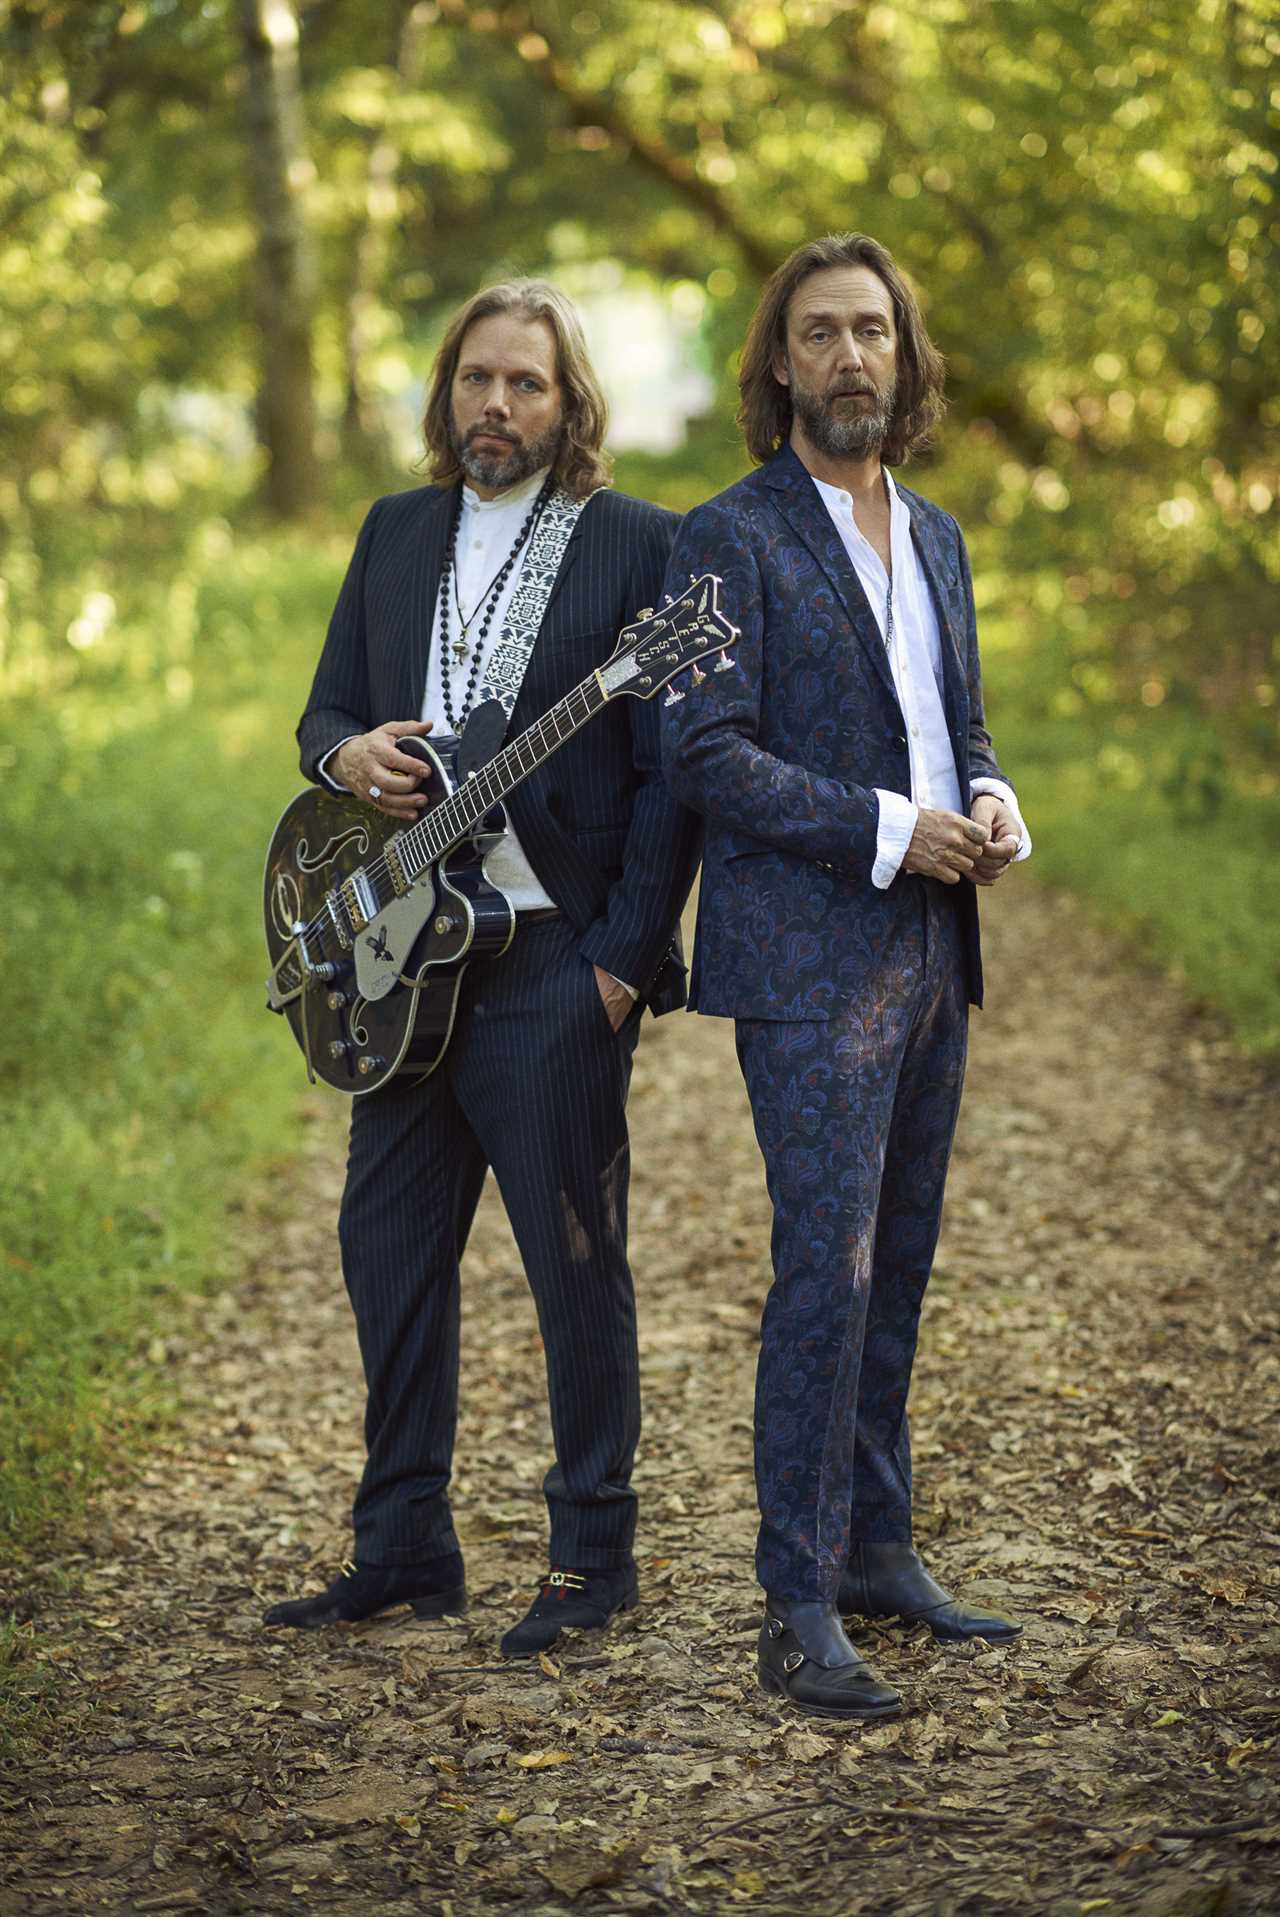 Black Crowes: A Rekindled Love Affair with Rock and Roll